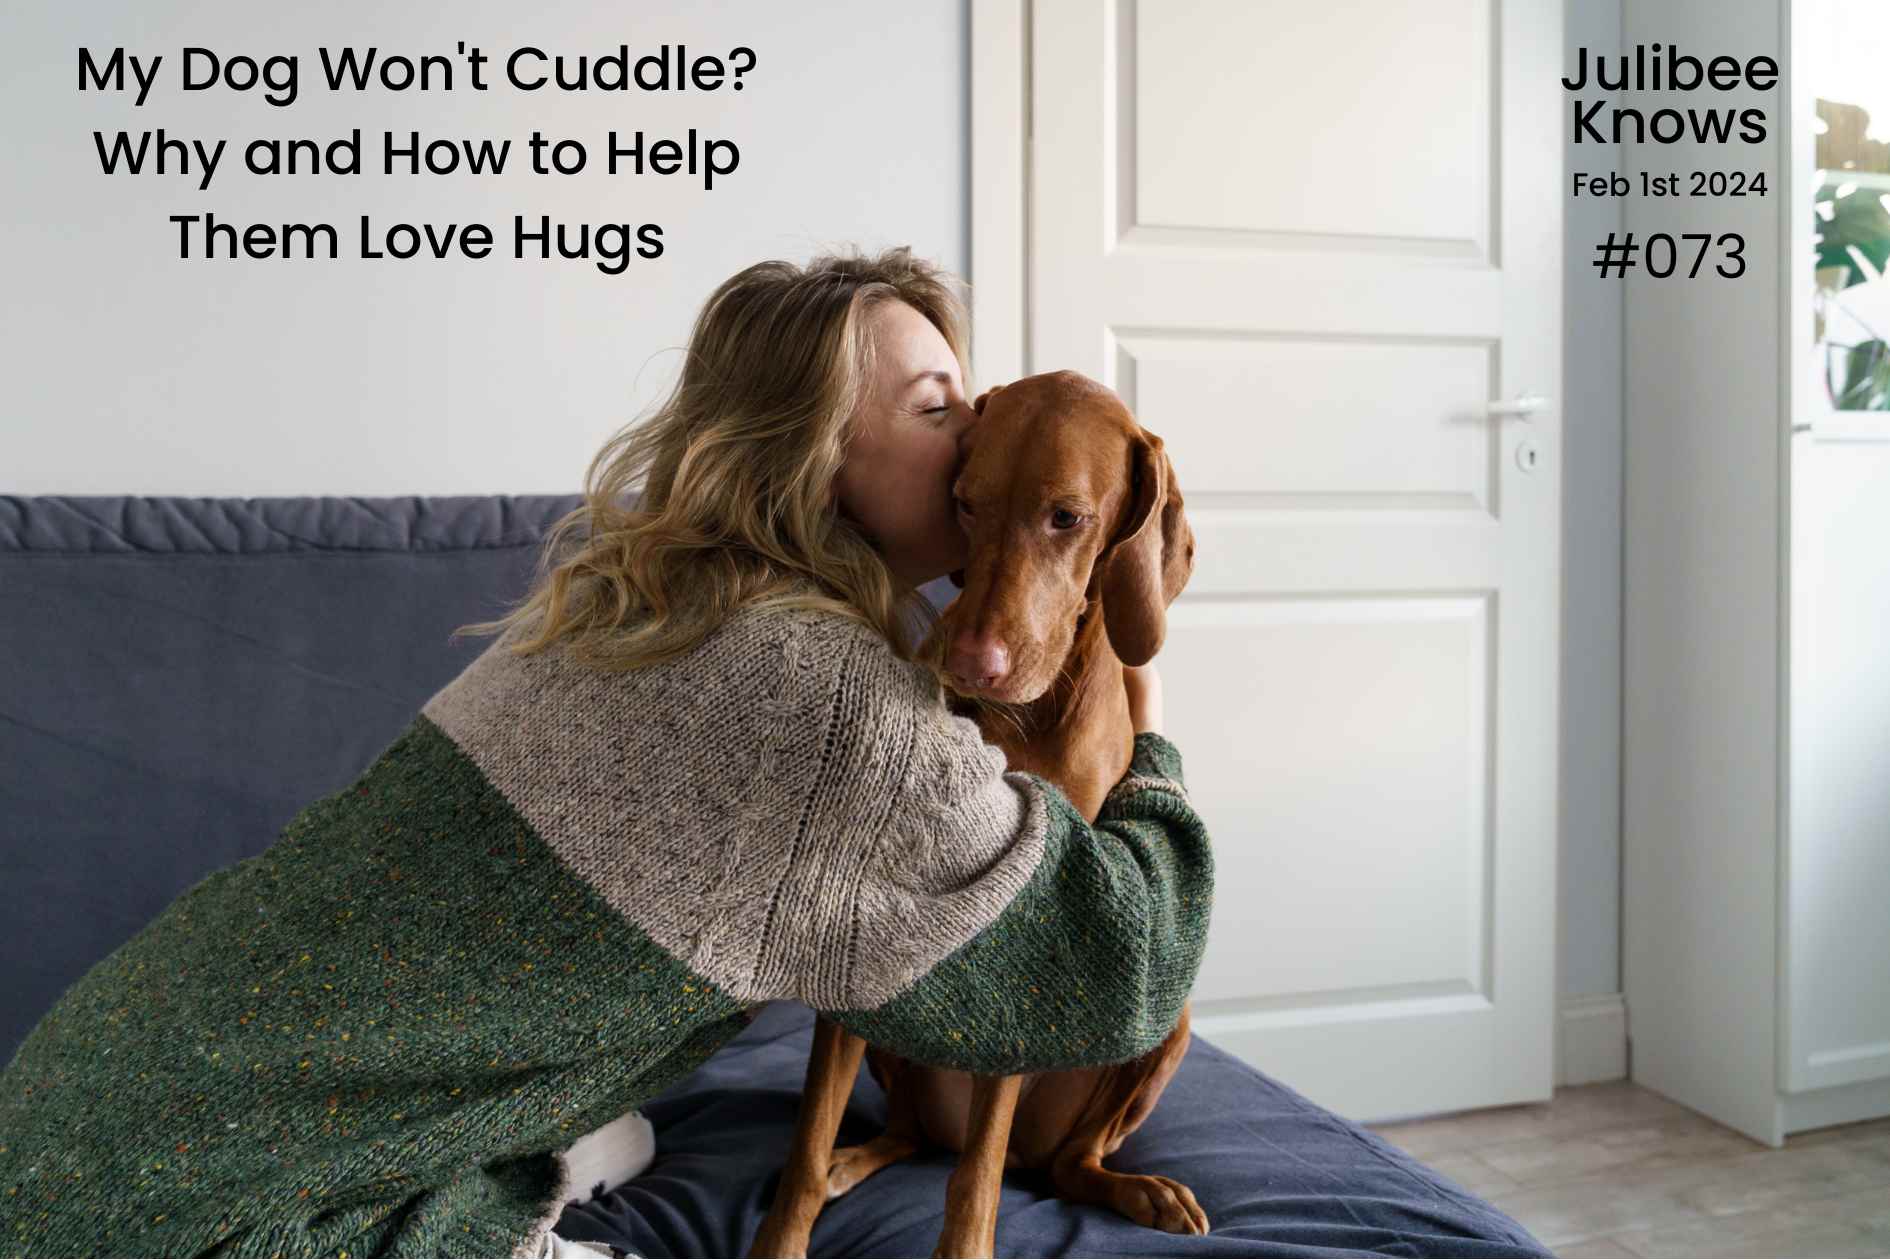 My Dog Won't Cuddle Why and How to Help Them Love Hugs